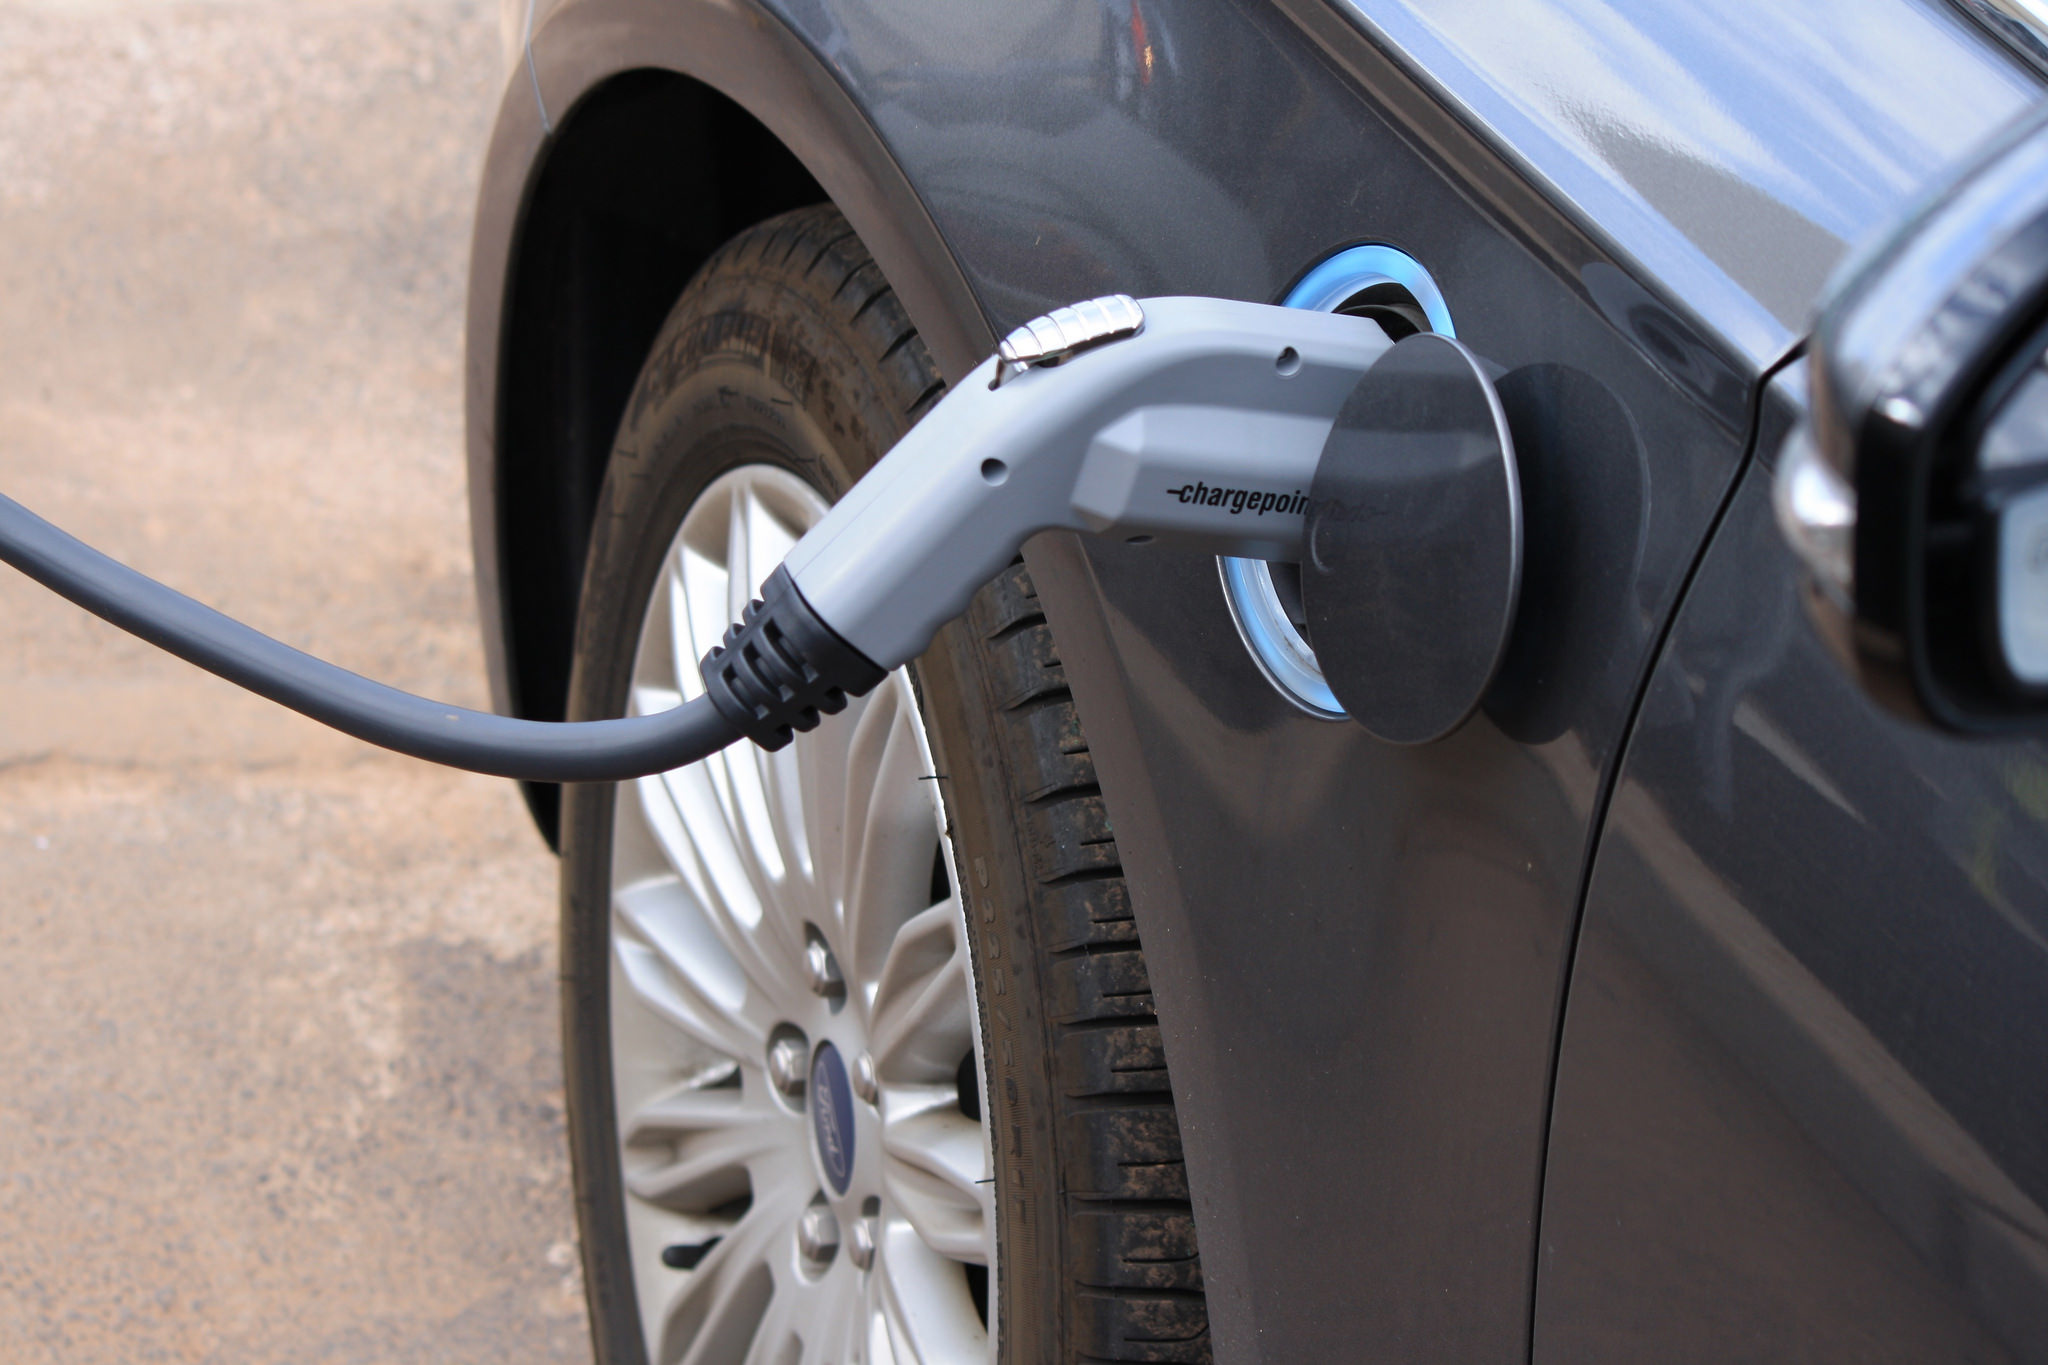 Austin's electric vehicle programming is revving up Austin